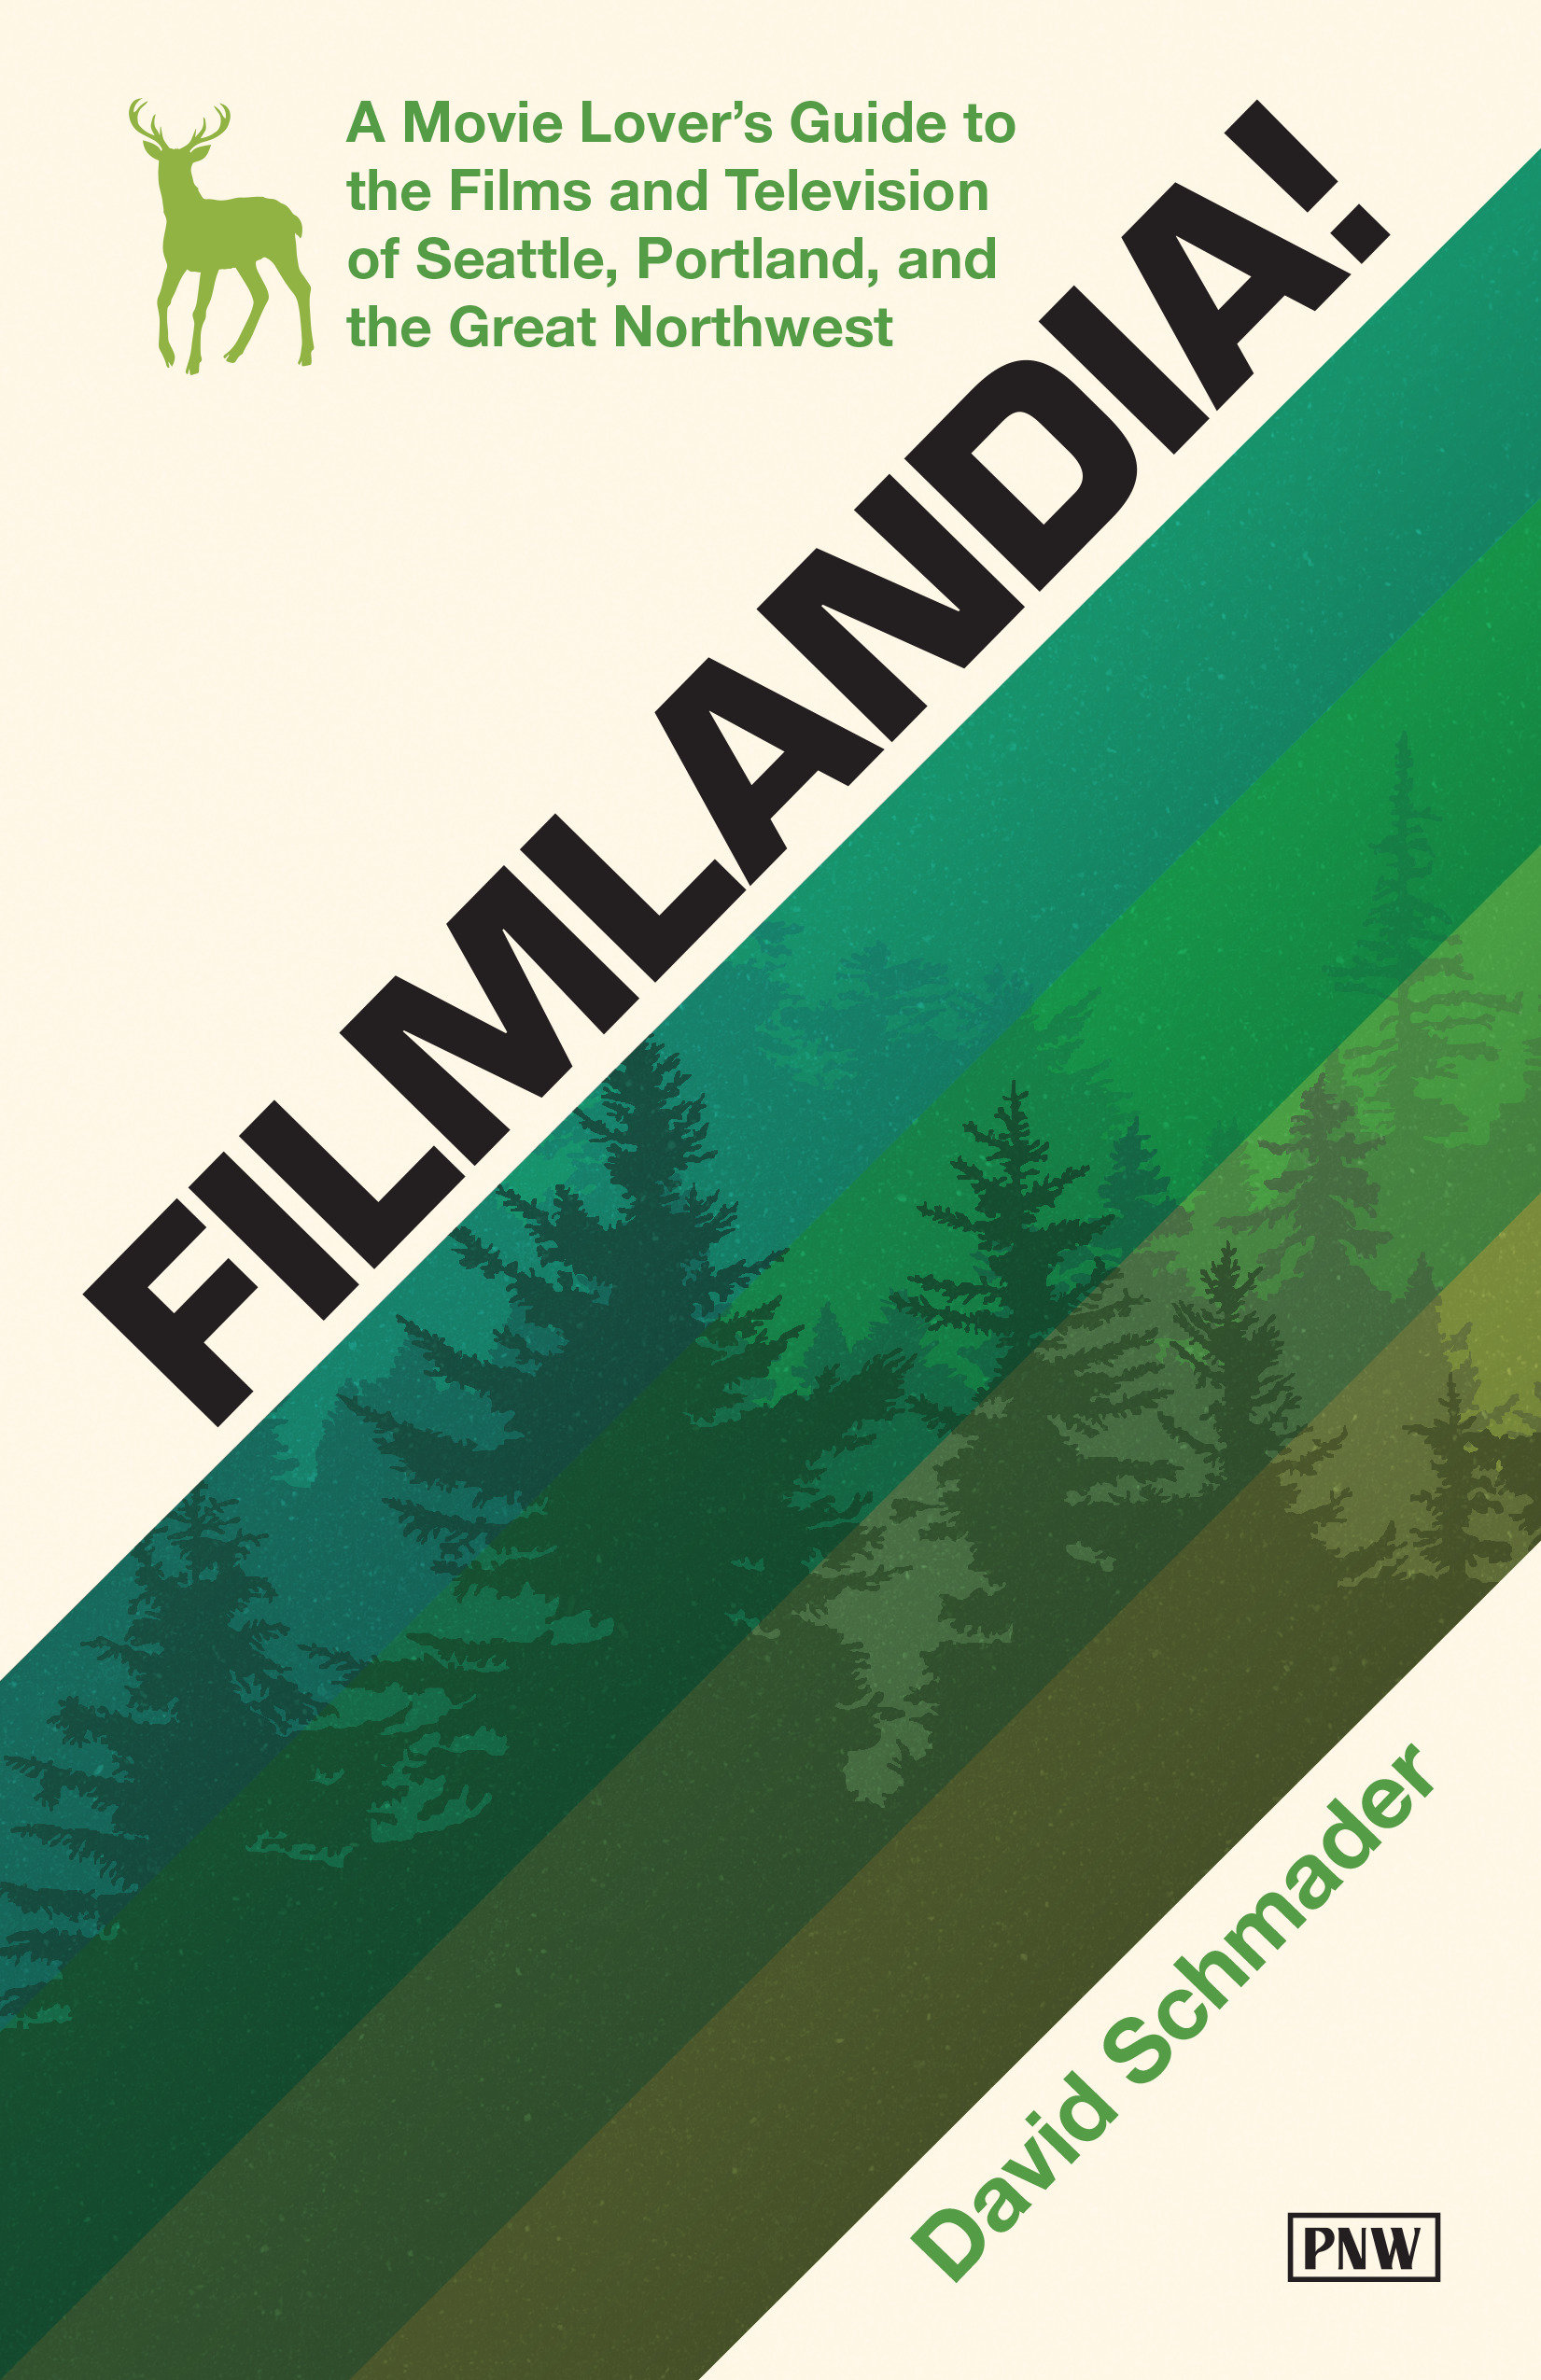 Filmlandia! A Movie Lover's Guide To The Films And Television of Seattle, Portland, and the Great Northwest